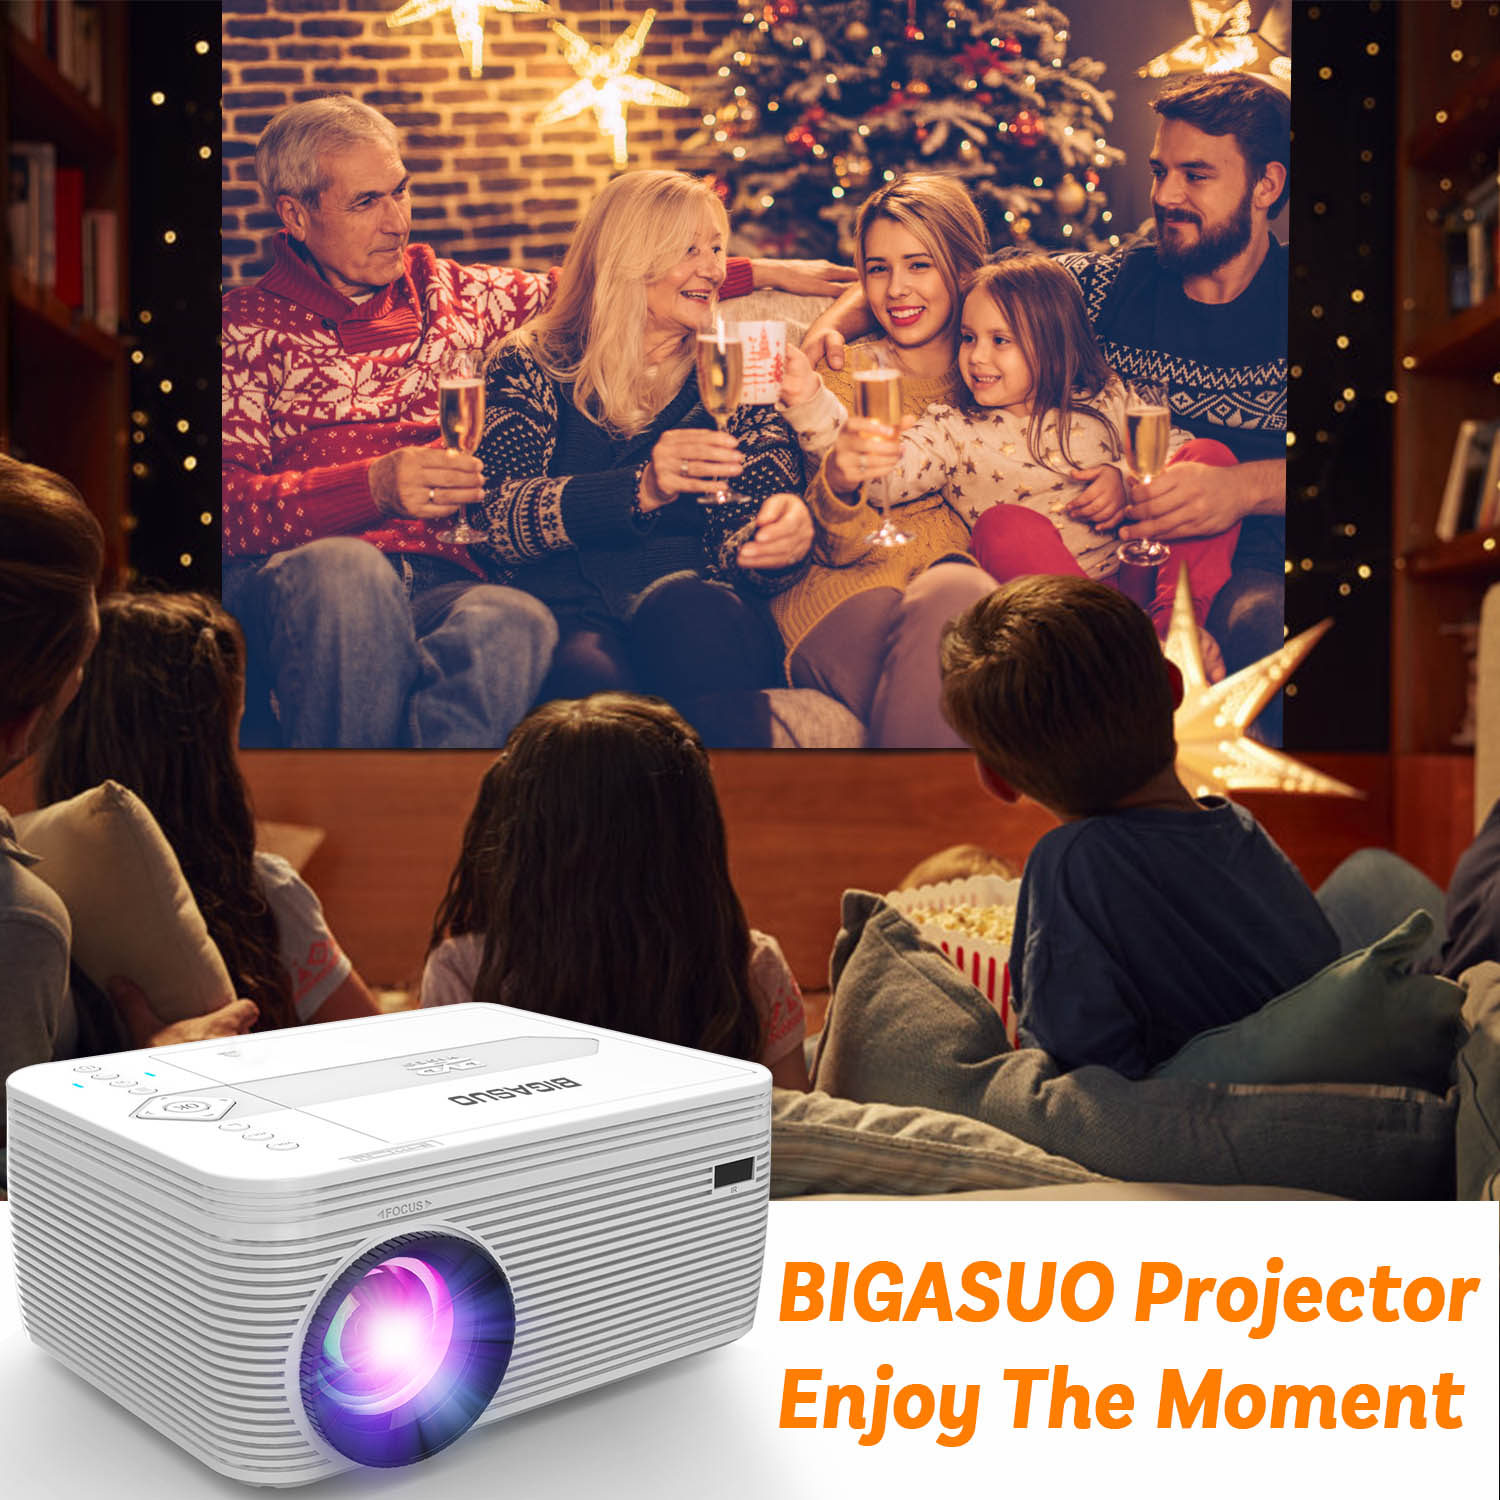 BIGASUO Projector Native 720P, Portable Support 1080P Projector with 55000 Hours Lamp Life, Built in DVD Player, Ideal for Home Theater - image 3 of 6